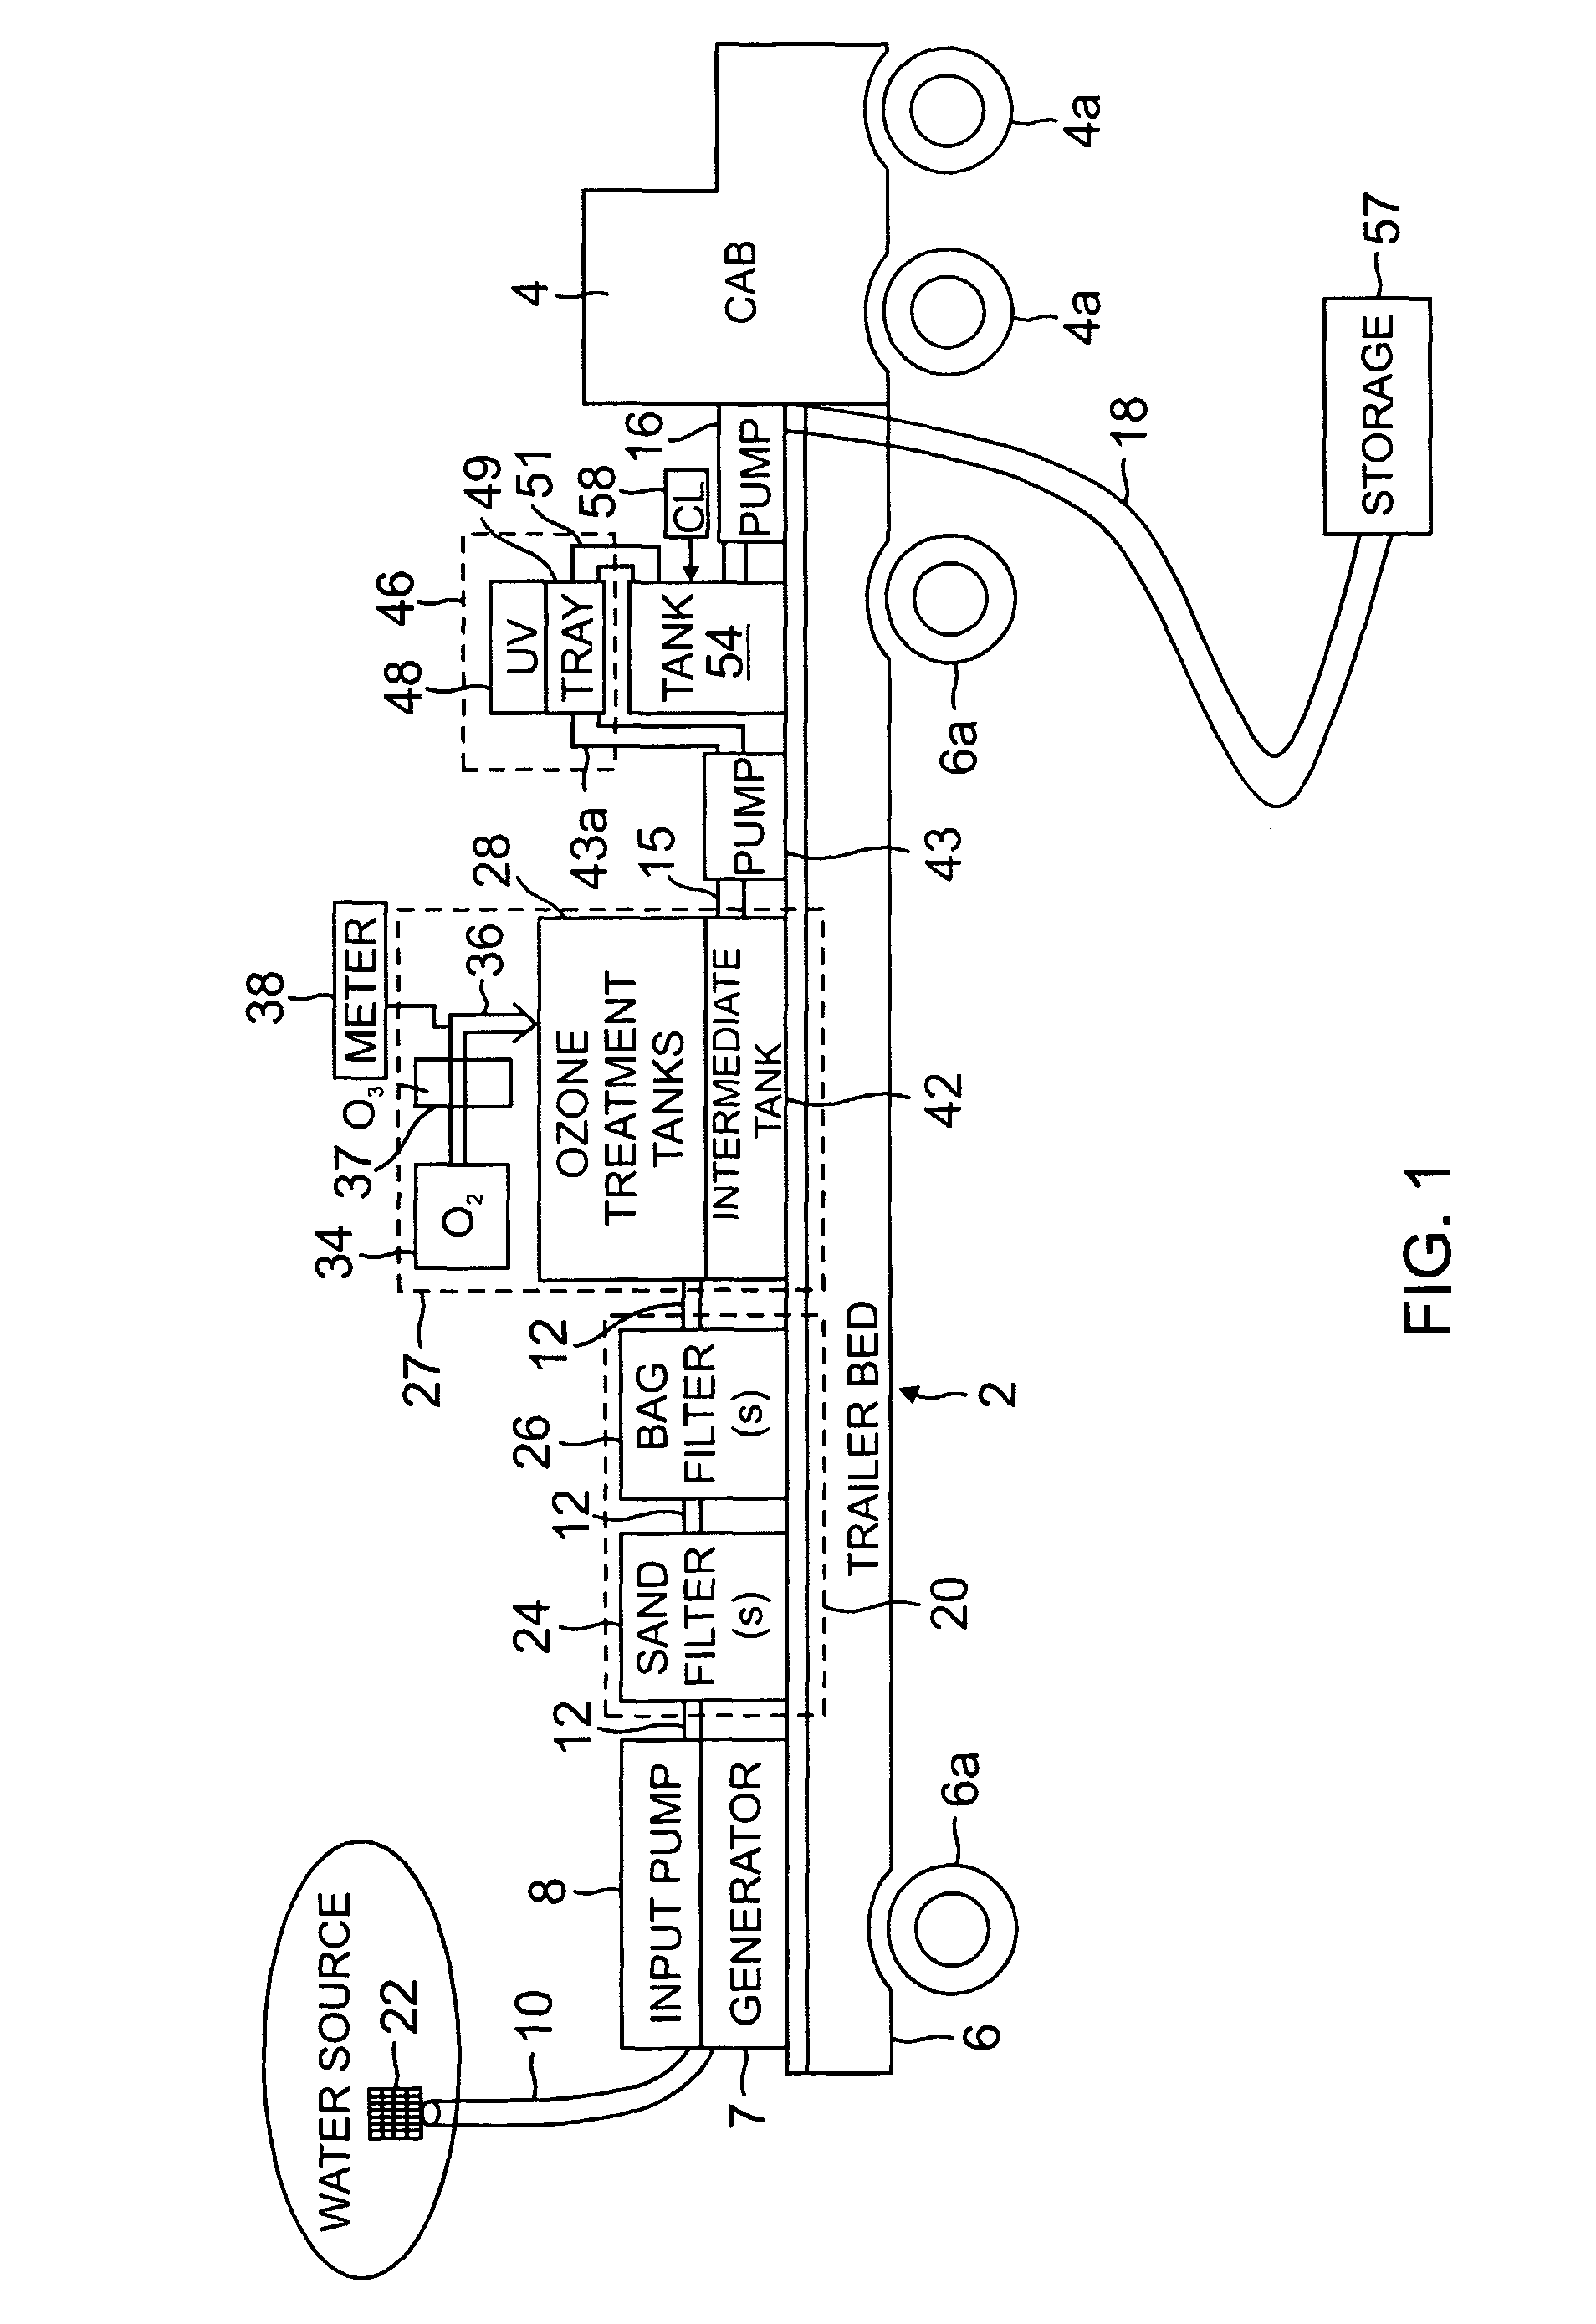 System and method of water treatment